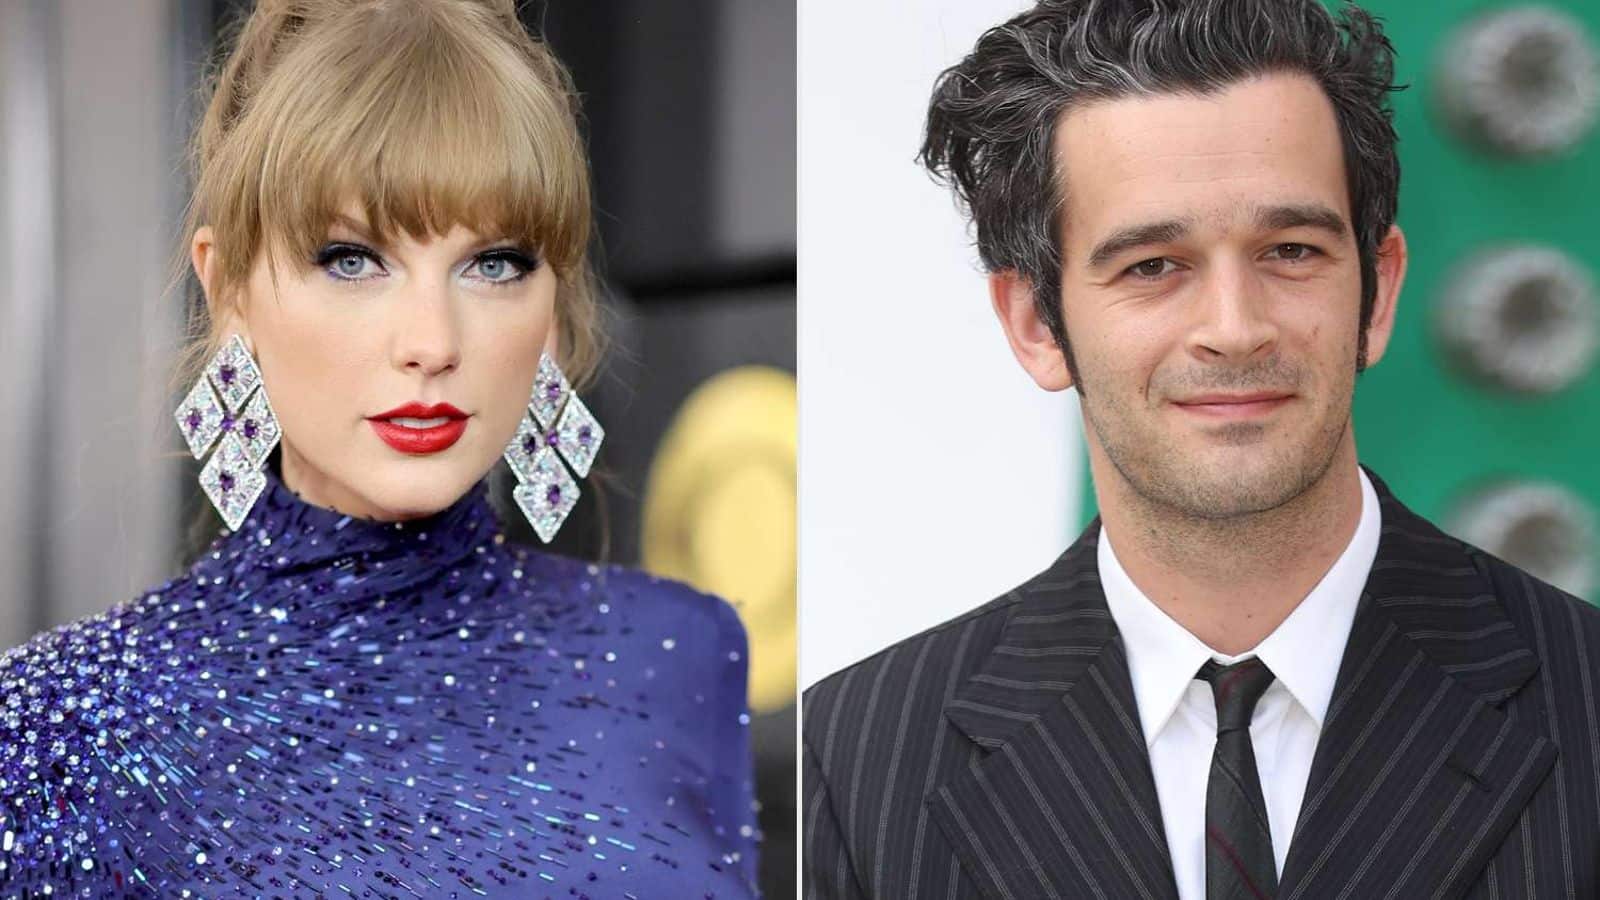 Taylor Swift's new album seems to refer to Matty Healy